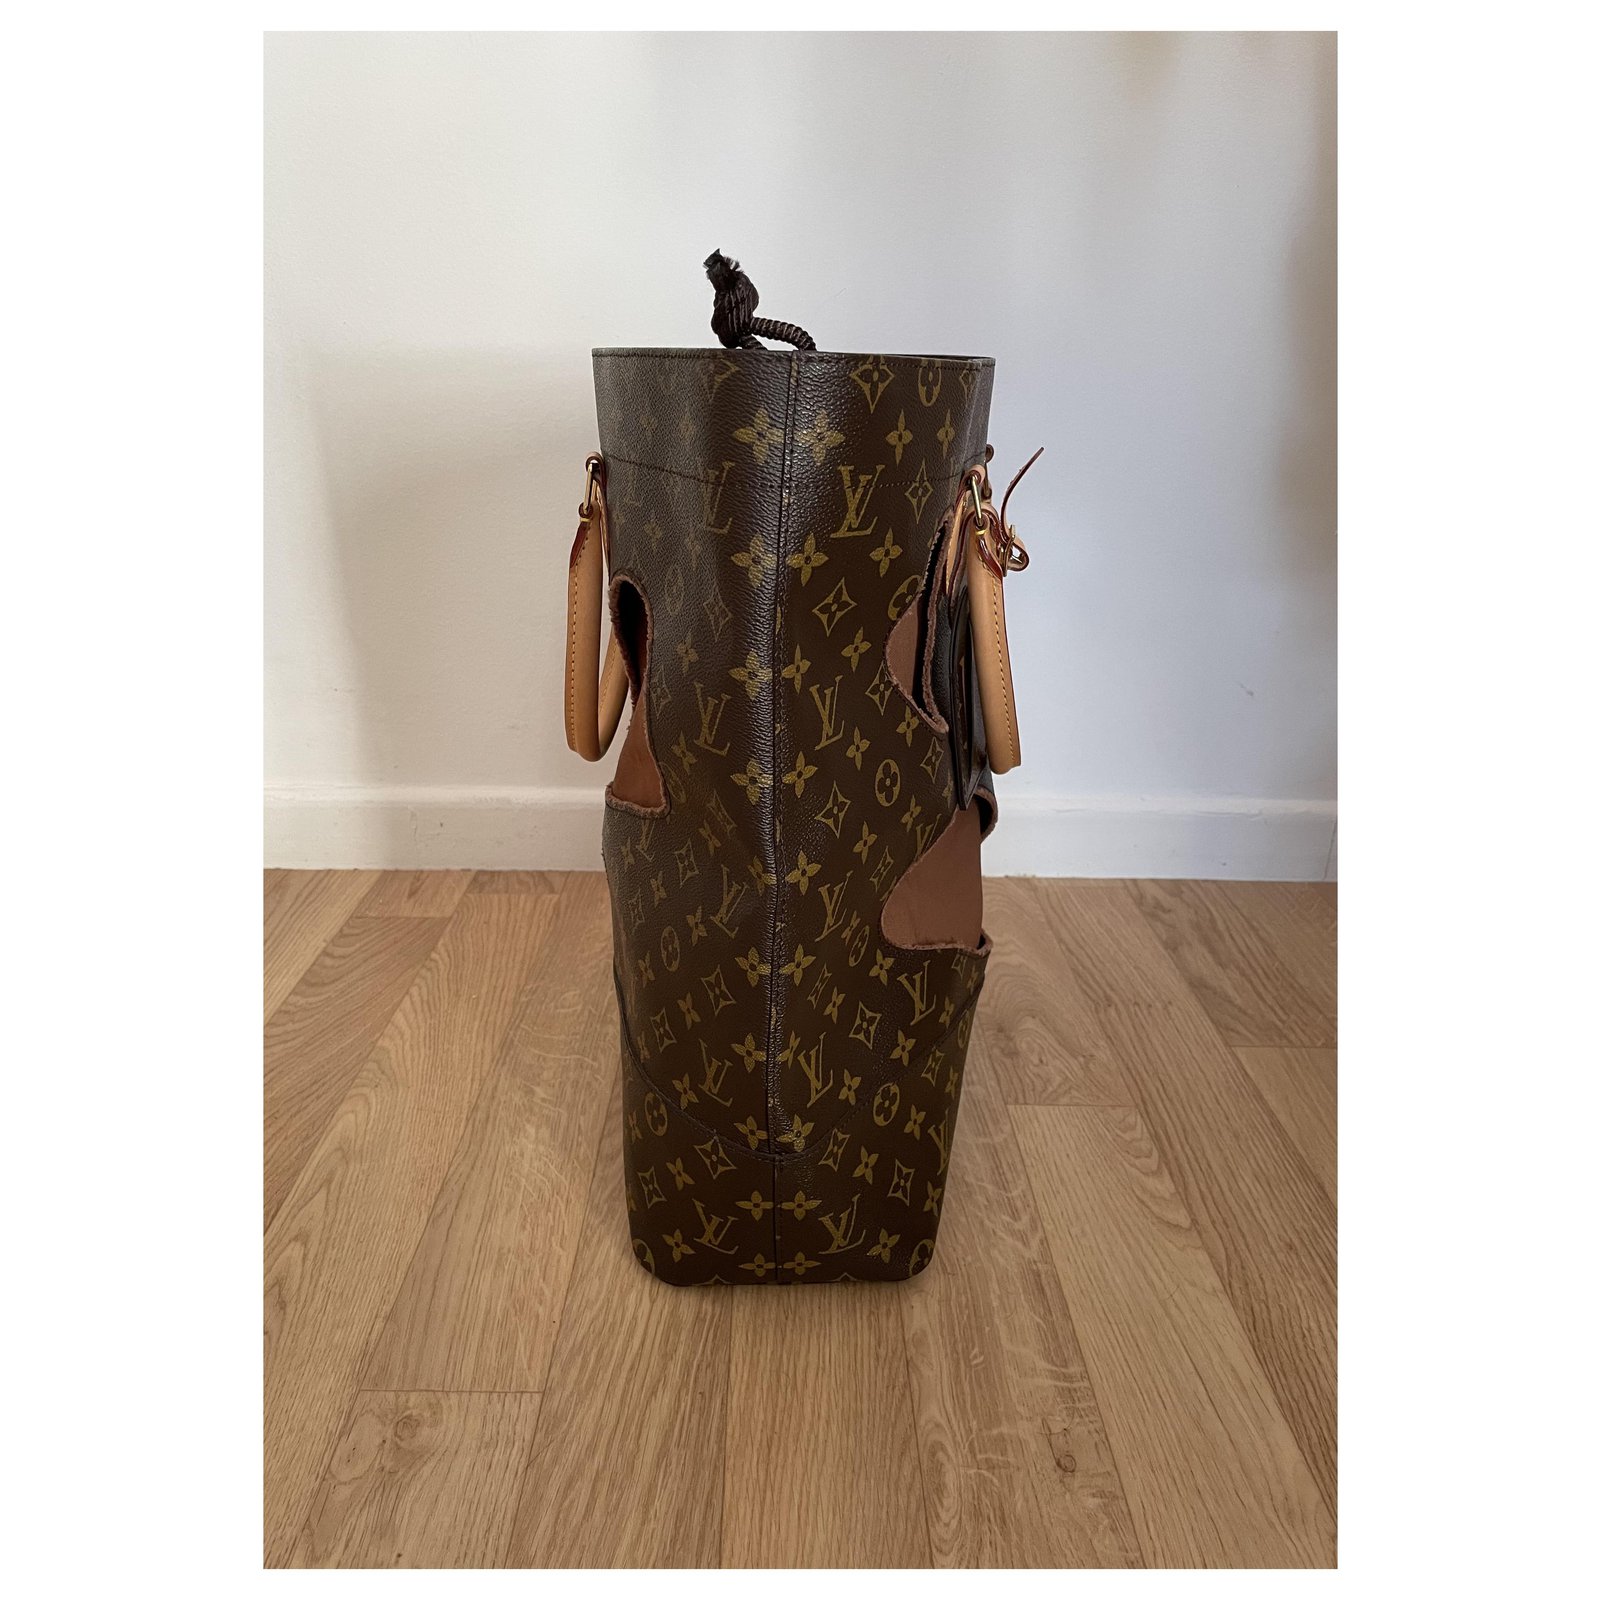 Plat by rei kawakubo leather tote Louis Vuitton Brown in Leather